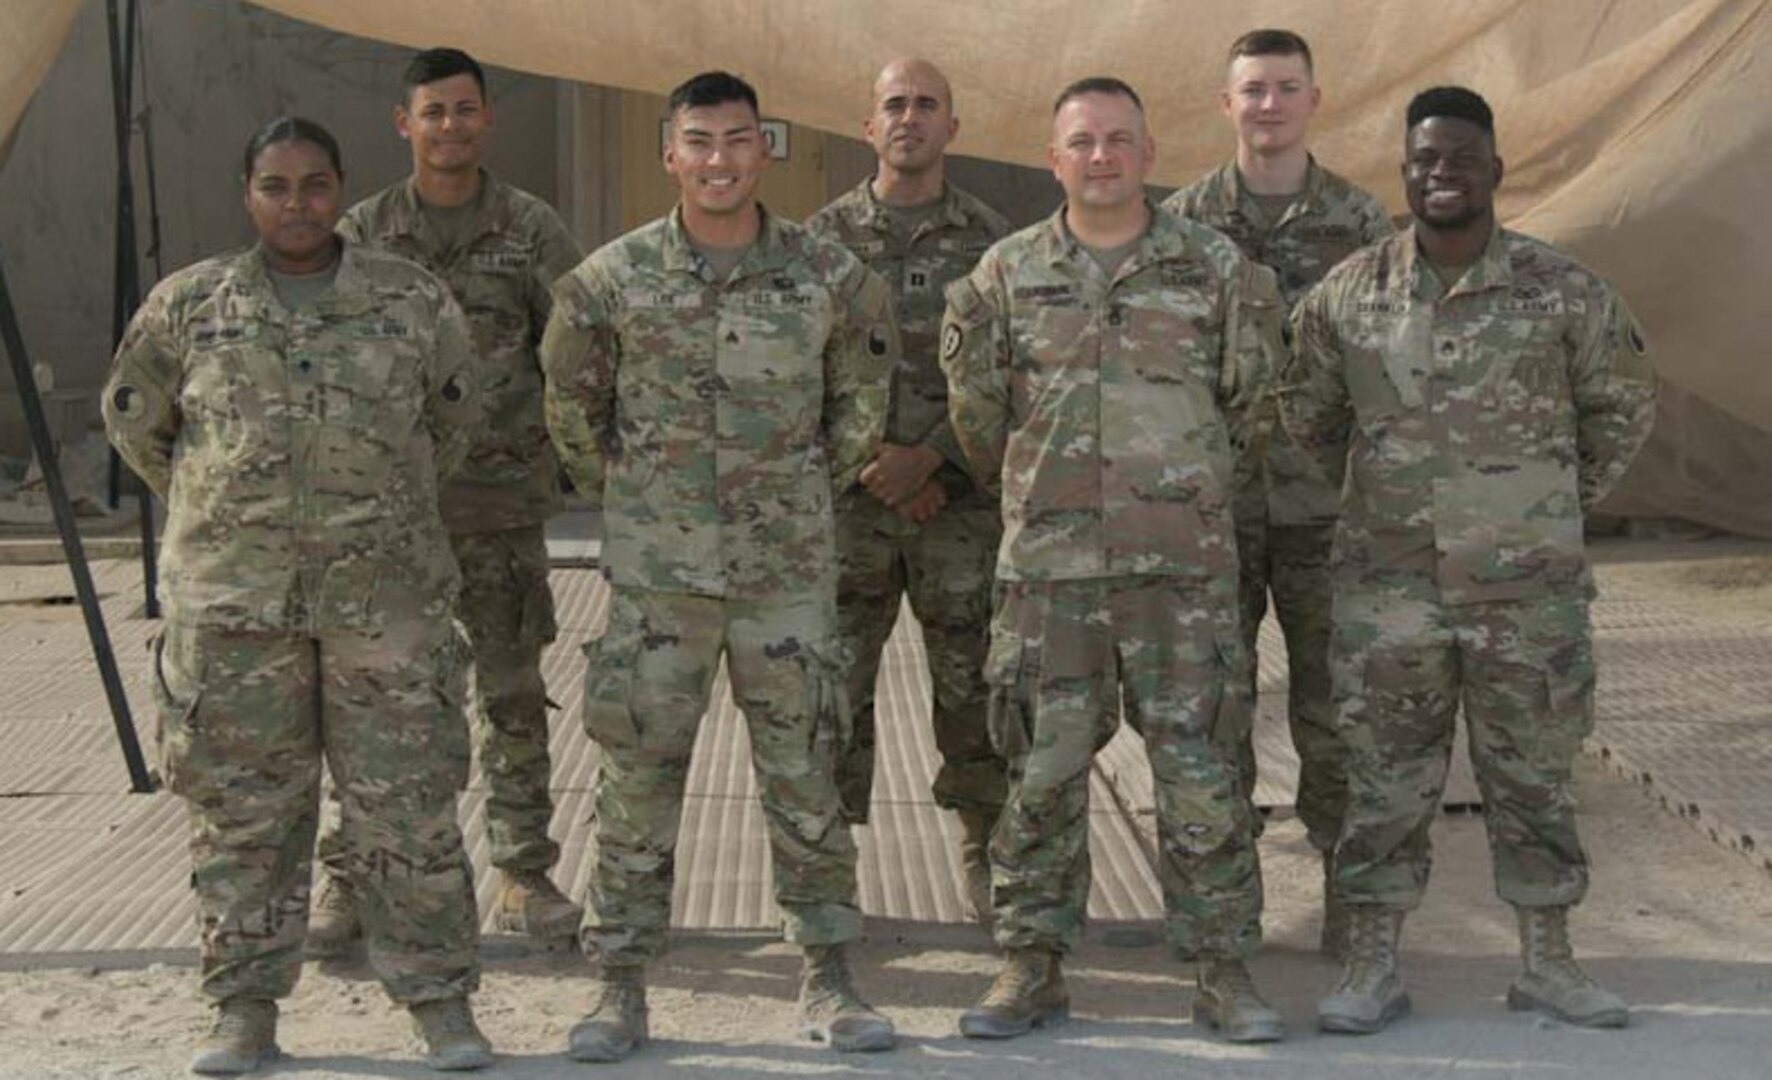 Despite mission change, 29th ID Soldiers' resilience proves useful in escort mission